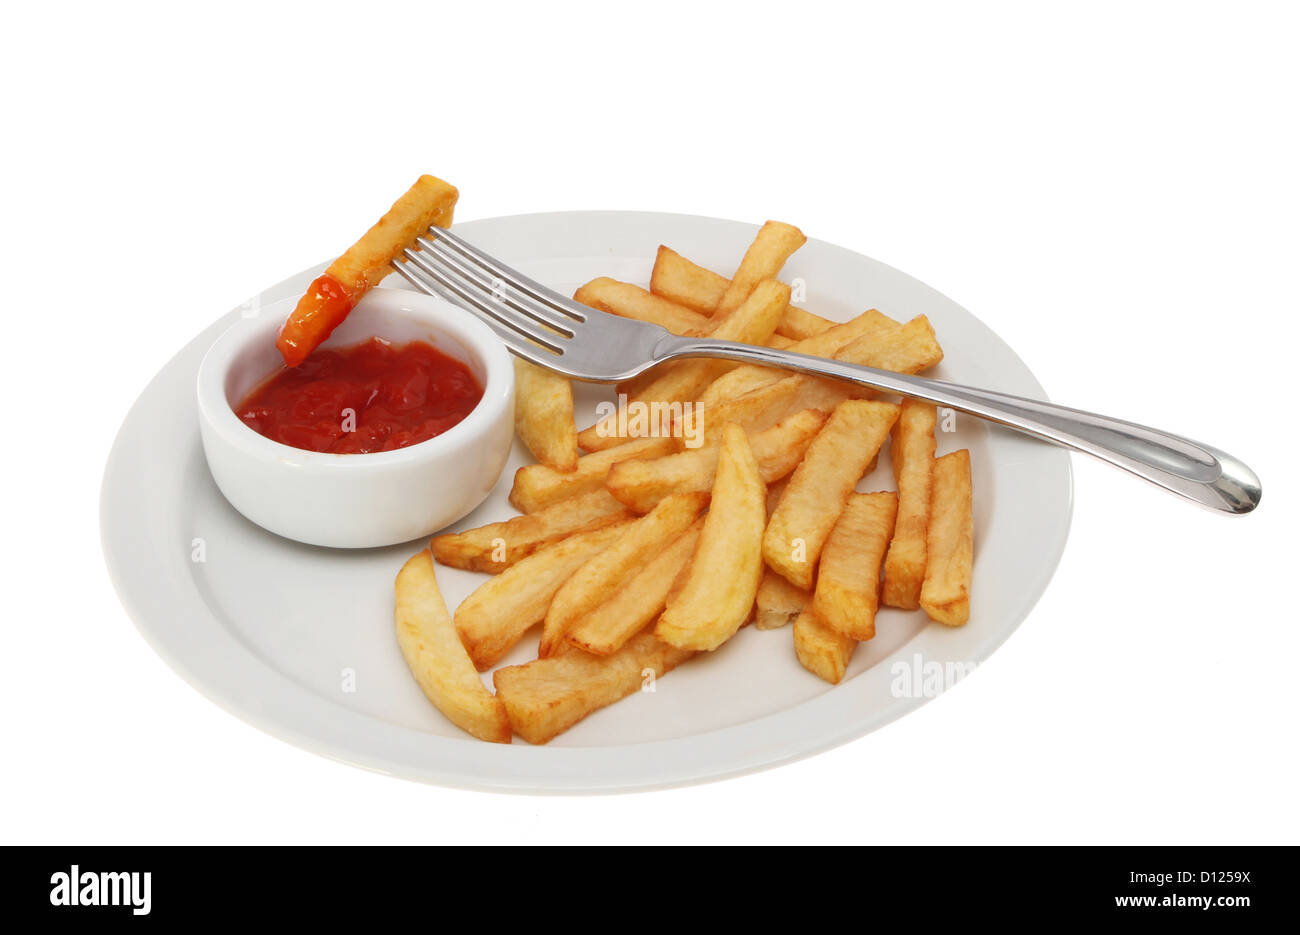 Potato chips on a plate with a fork and a ramekin of tomato ketchup isolated against white Stock Photo